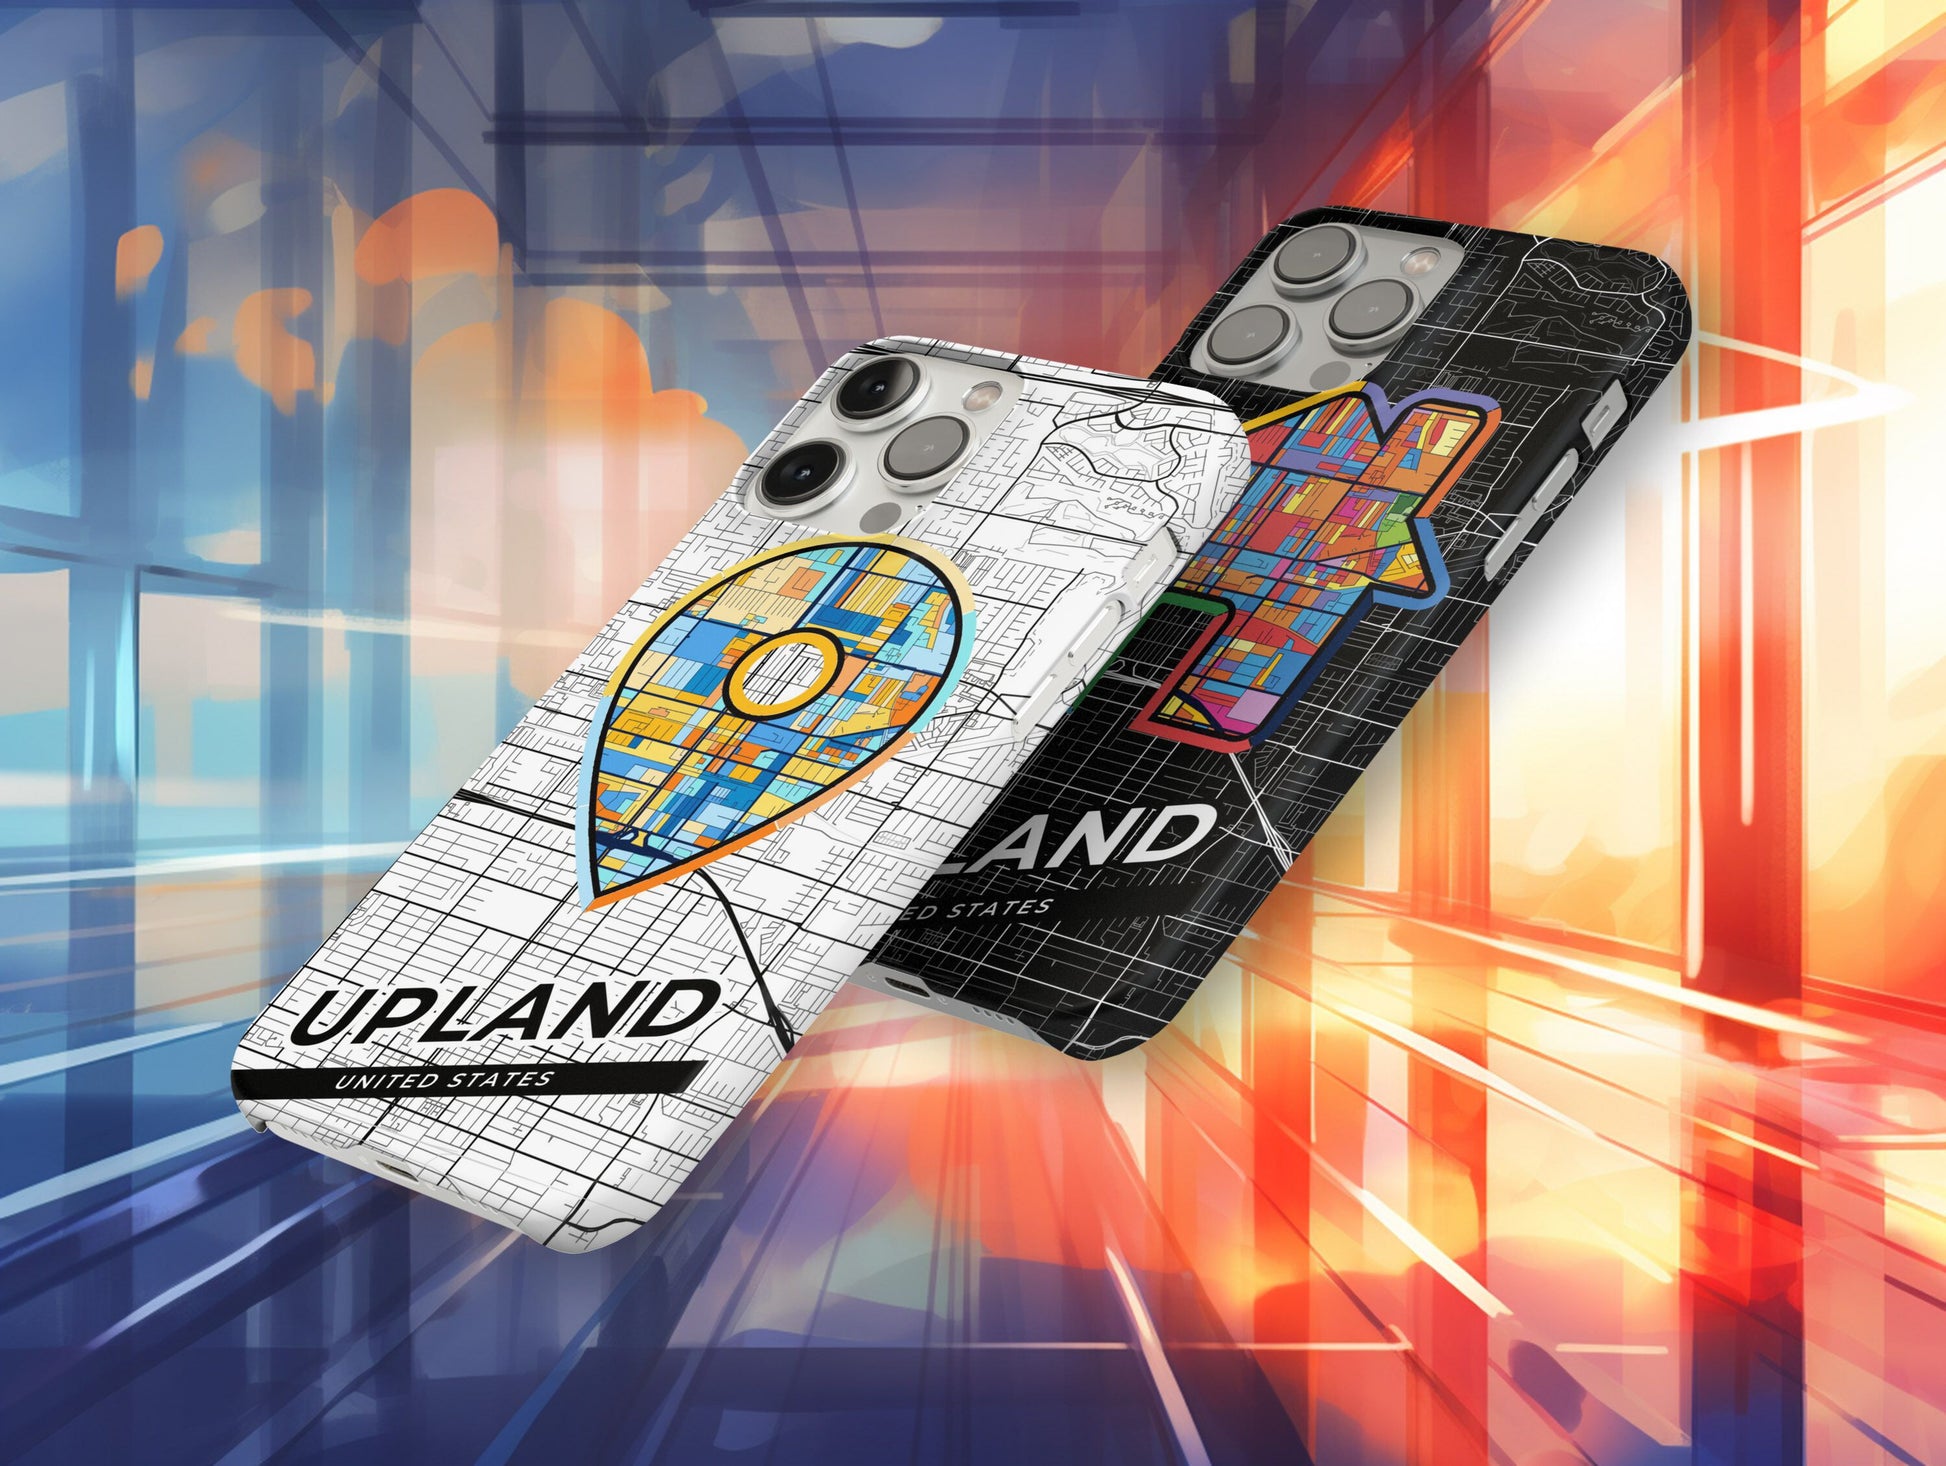 Upland California slim phone case with colorful icon